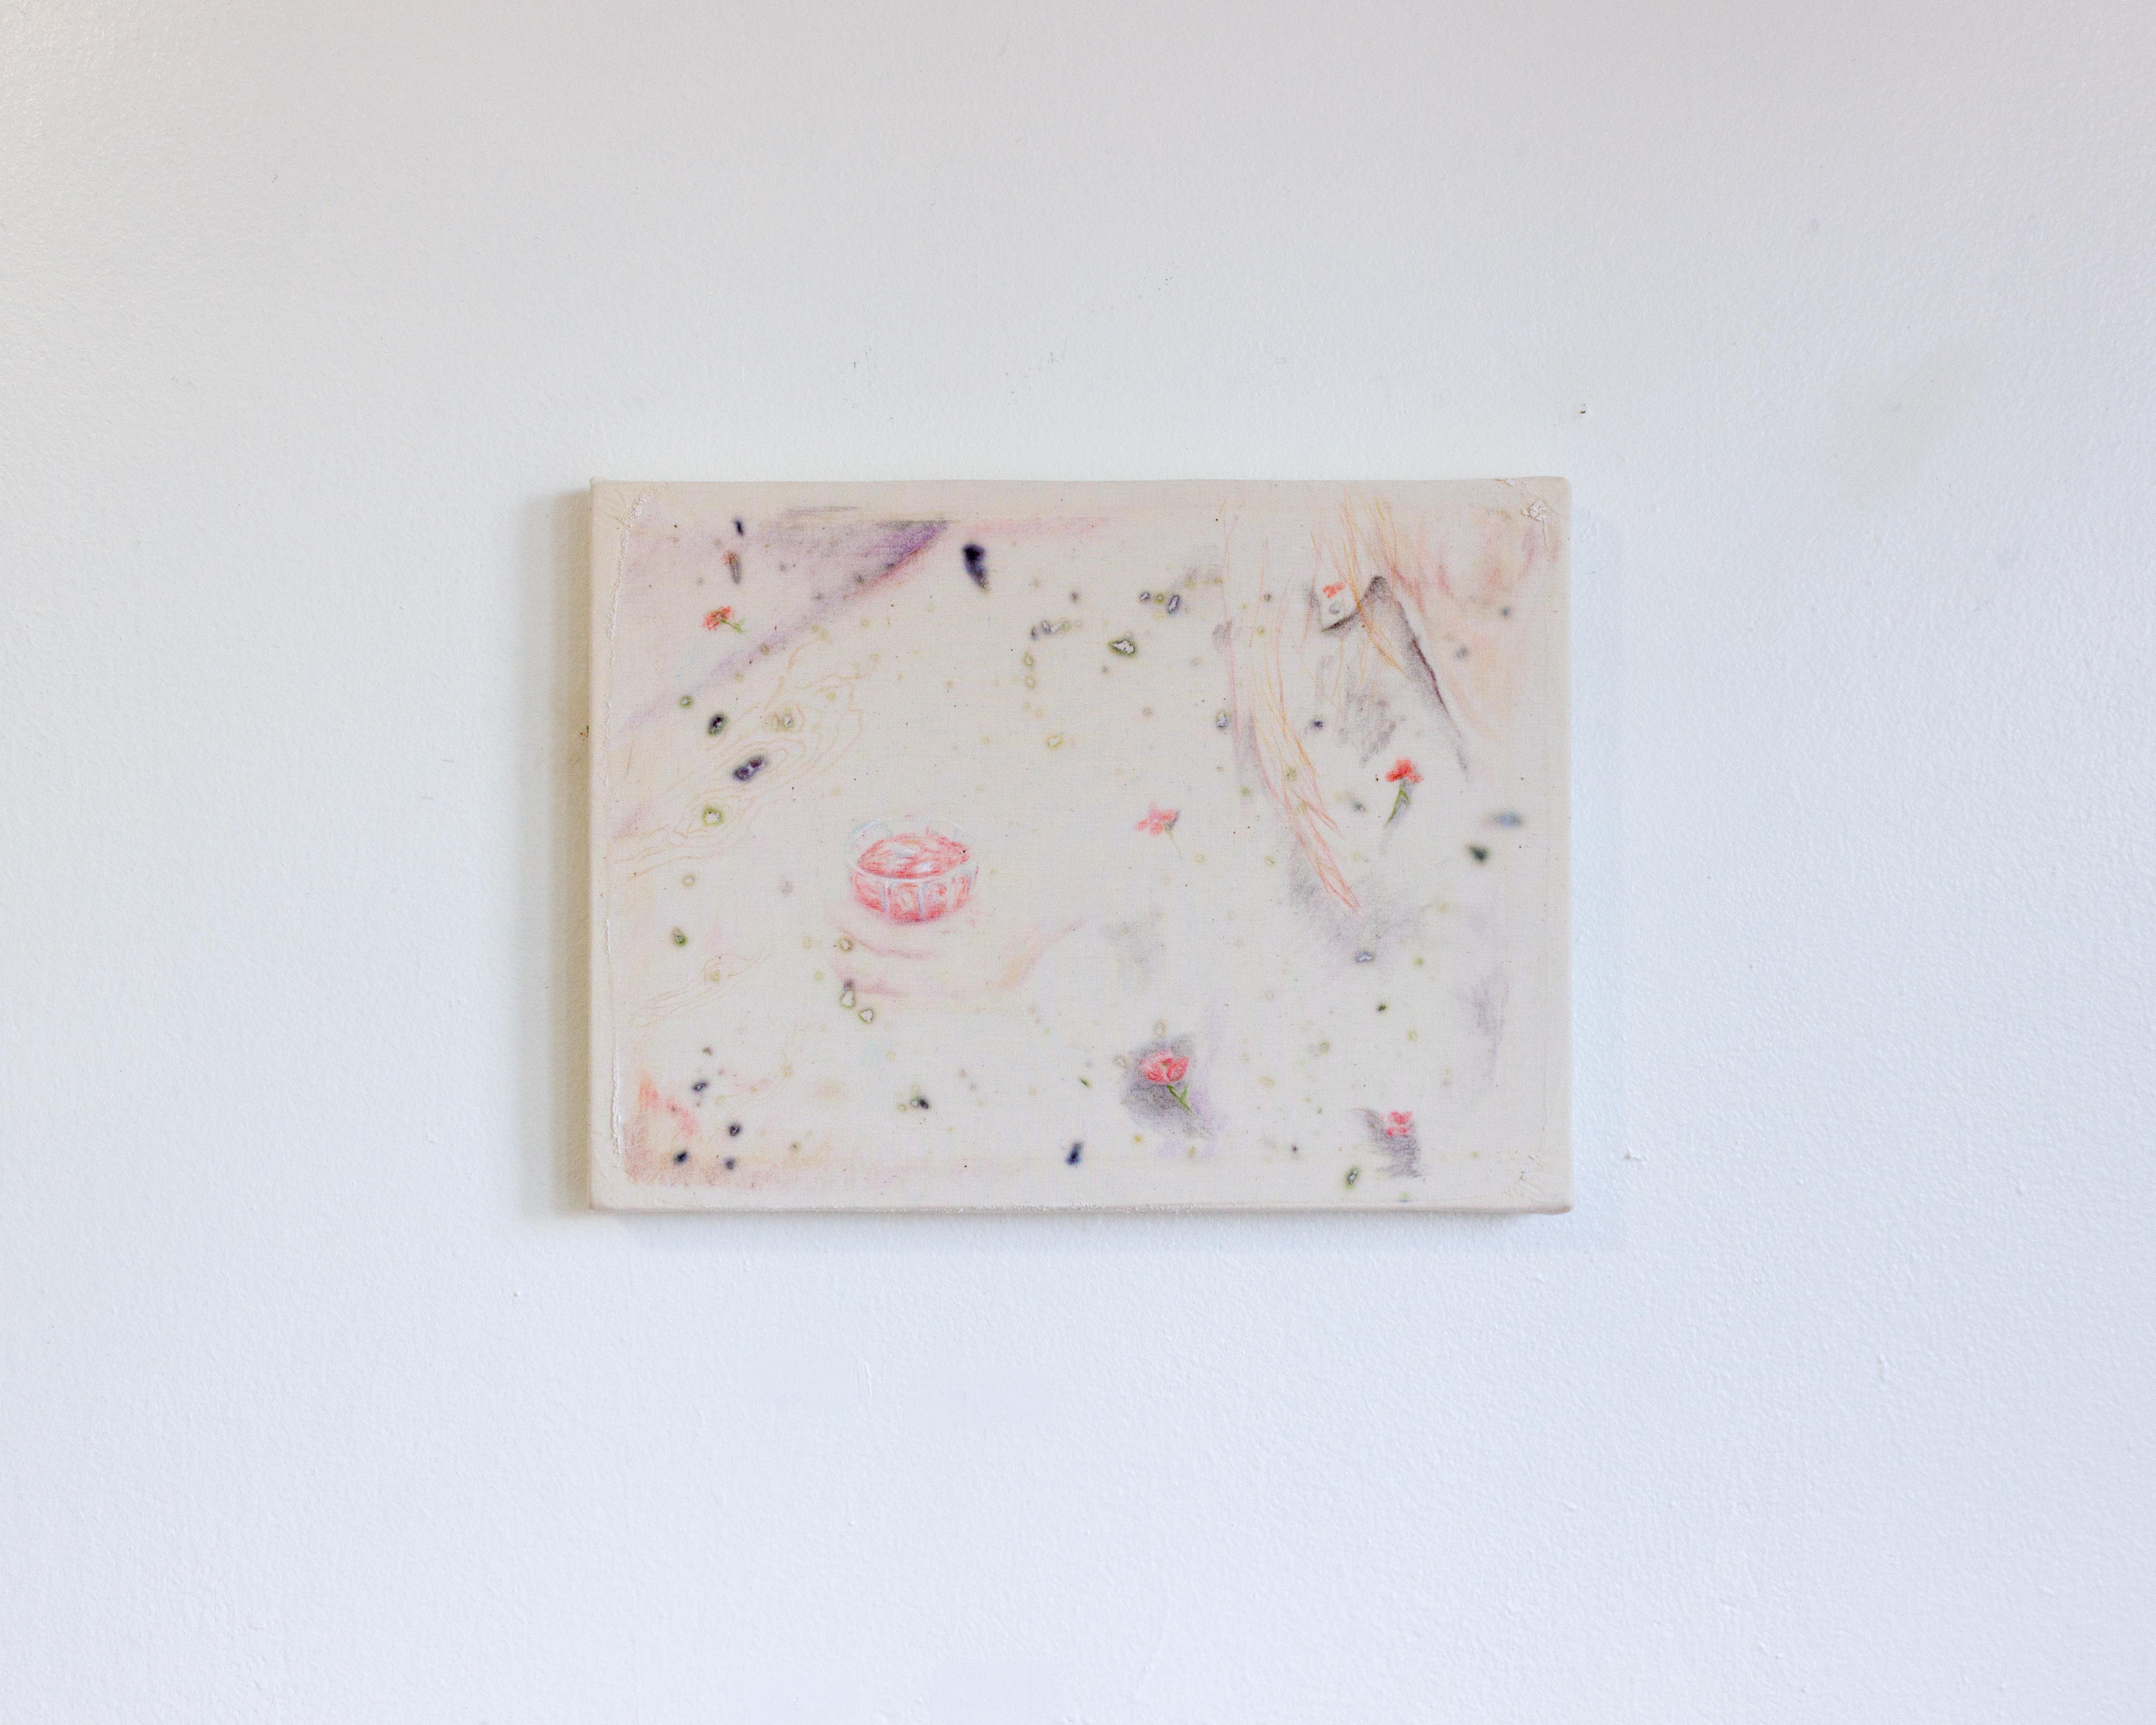 Image: Alejandro Jiménez-Flores, una noche maravillosa —a wonderful night, 2019, soft-pastels, flower petals dyes, and plaster on muslin, 9x11 in. Photo courtesy of Apparatus Projects.